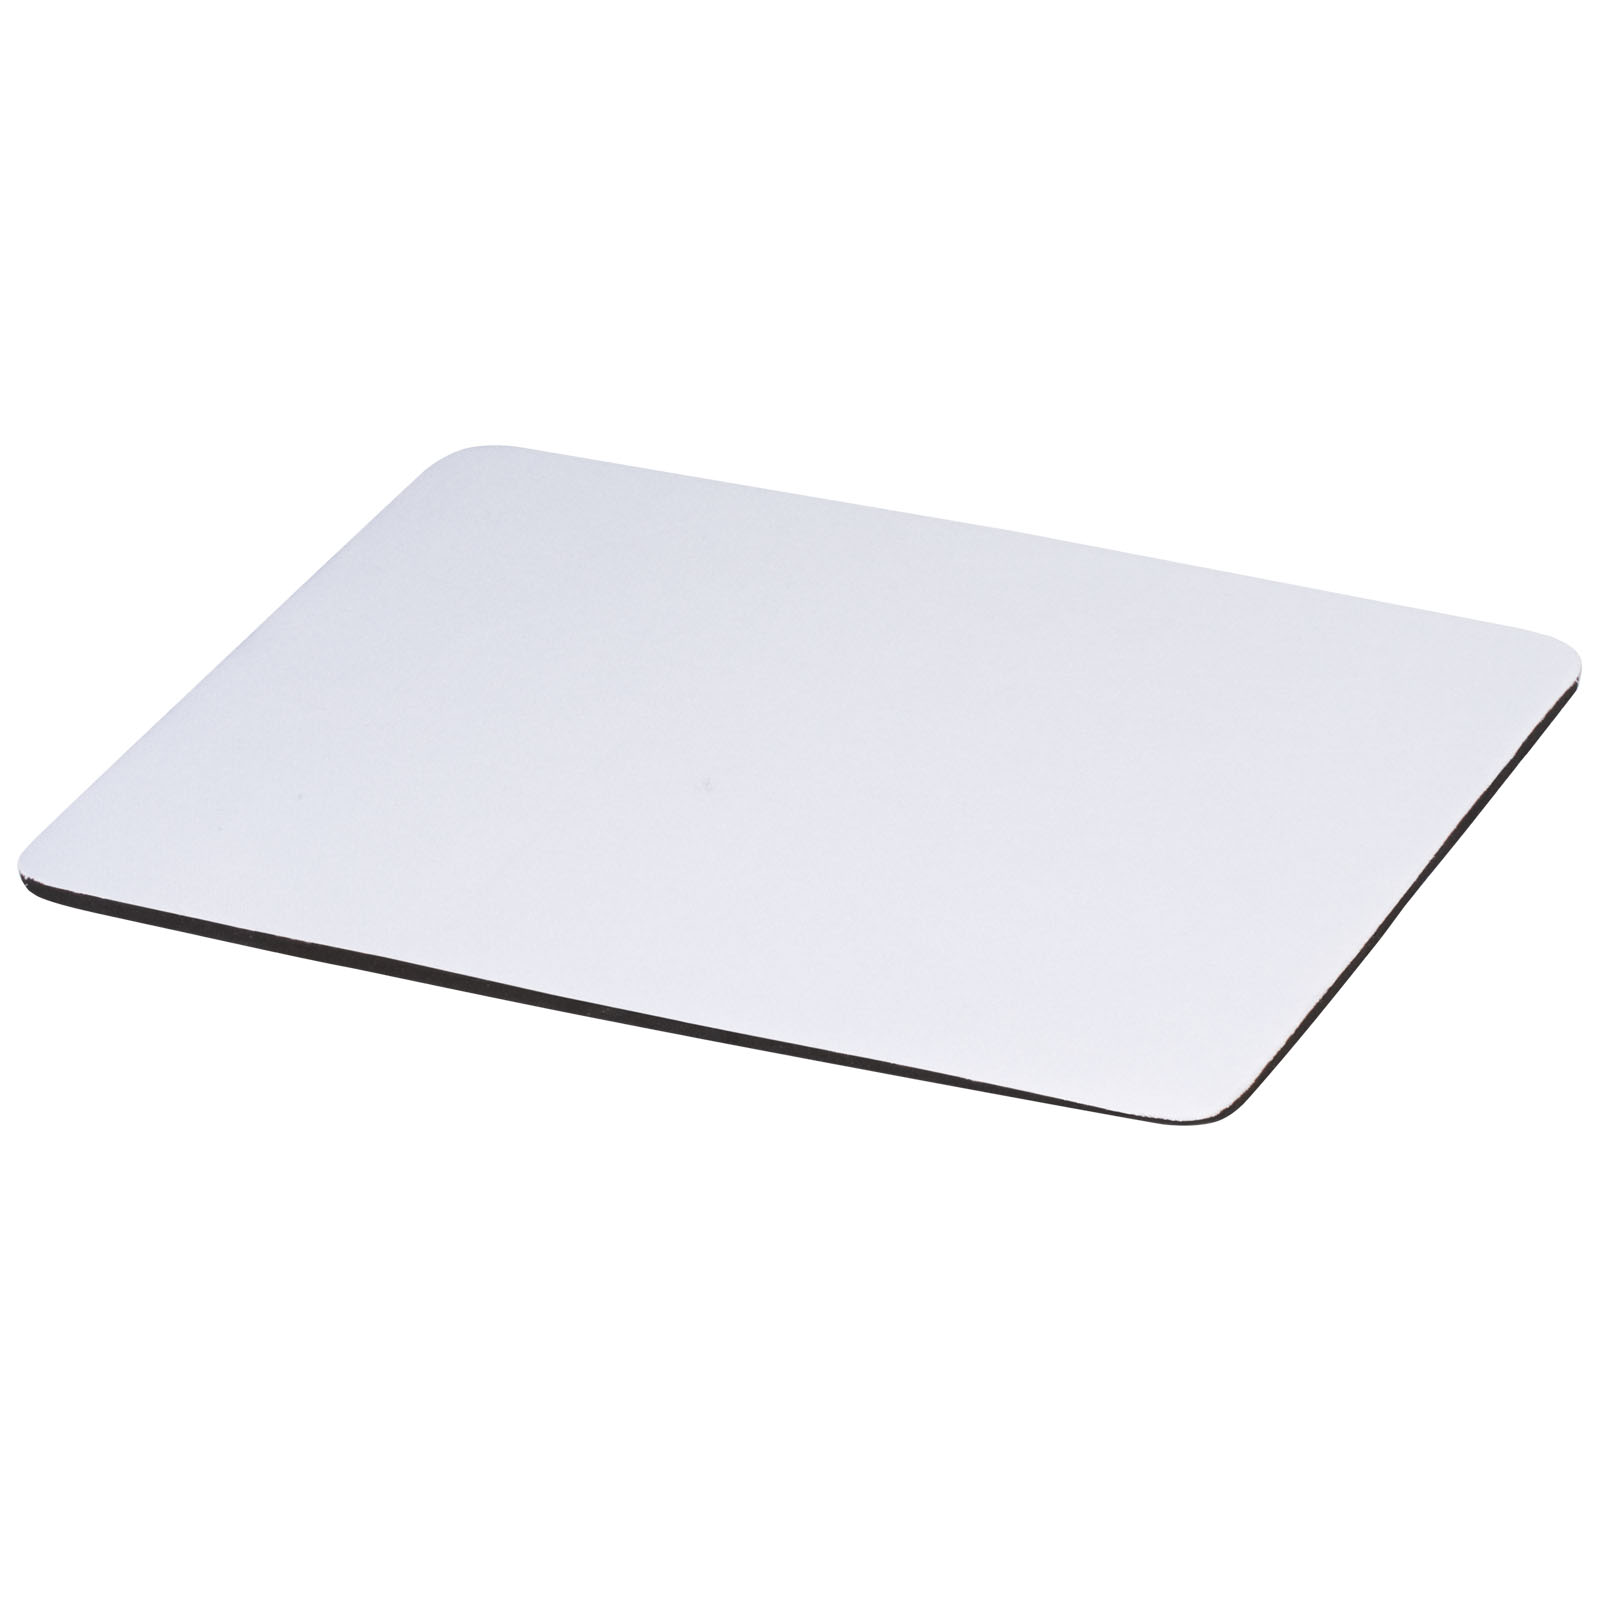 Technology - Pure mouse pad with antibacterial additive